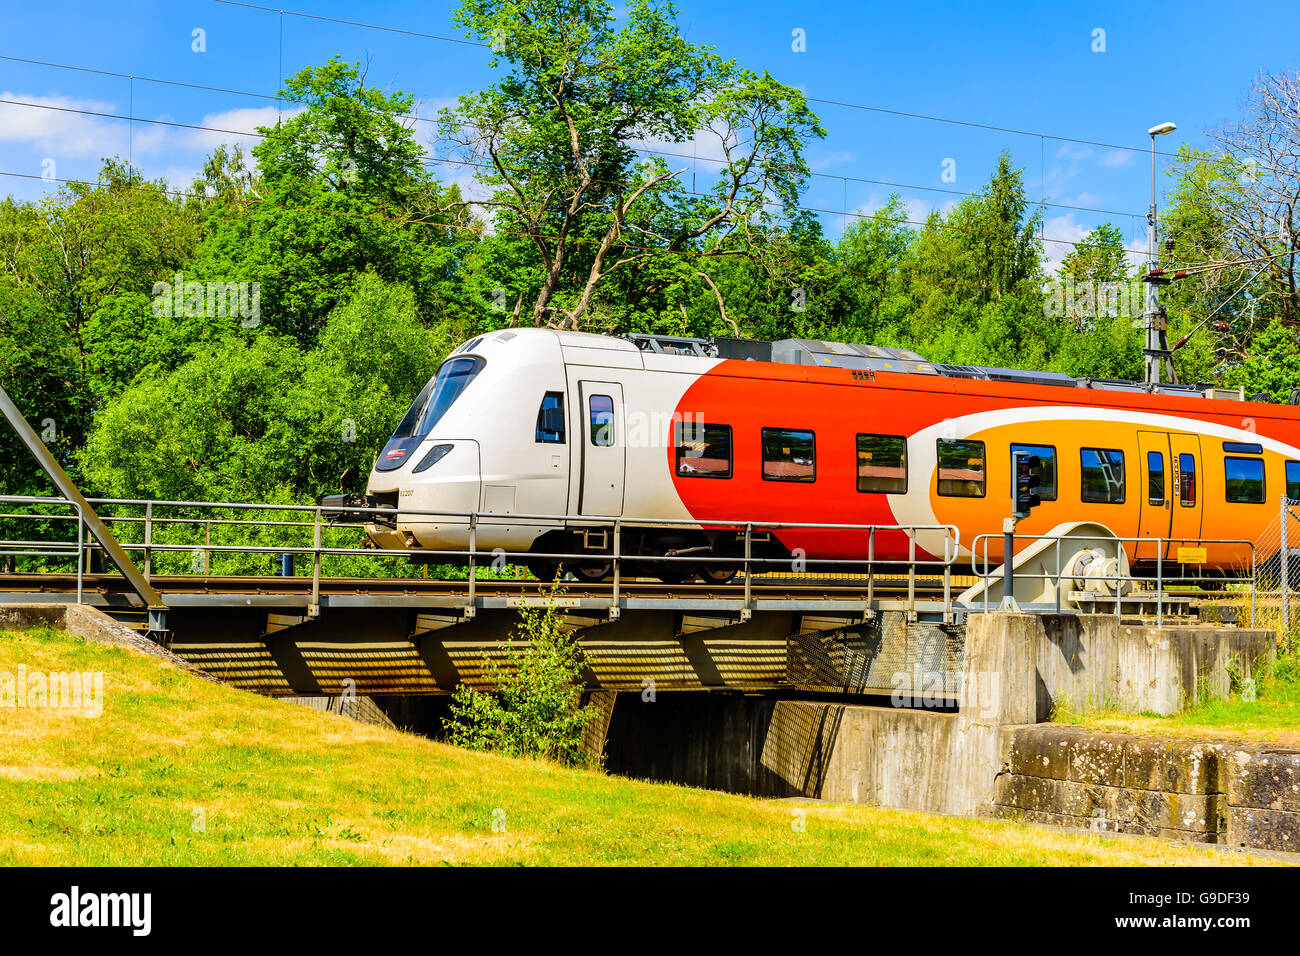 Norsholm, Sweden - June 20, 2016: Colorful train passing over a movable bridge crossing the Gota canal. Stock Photo